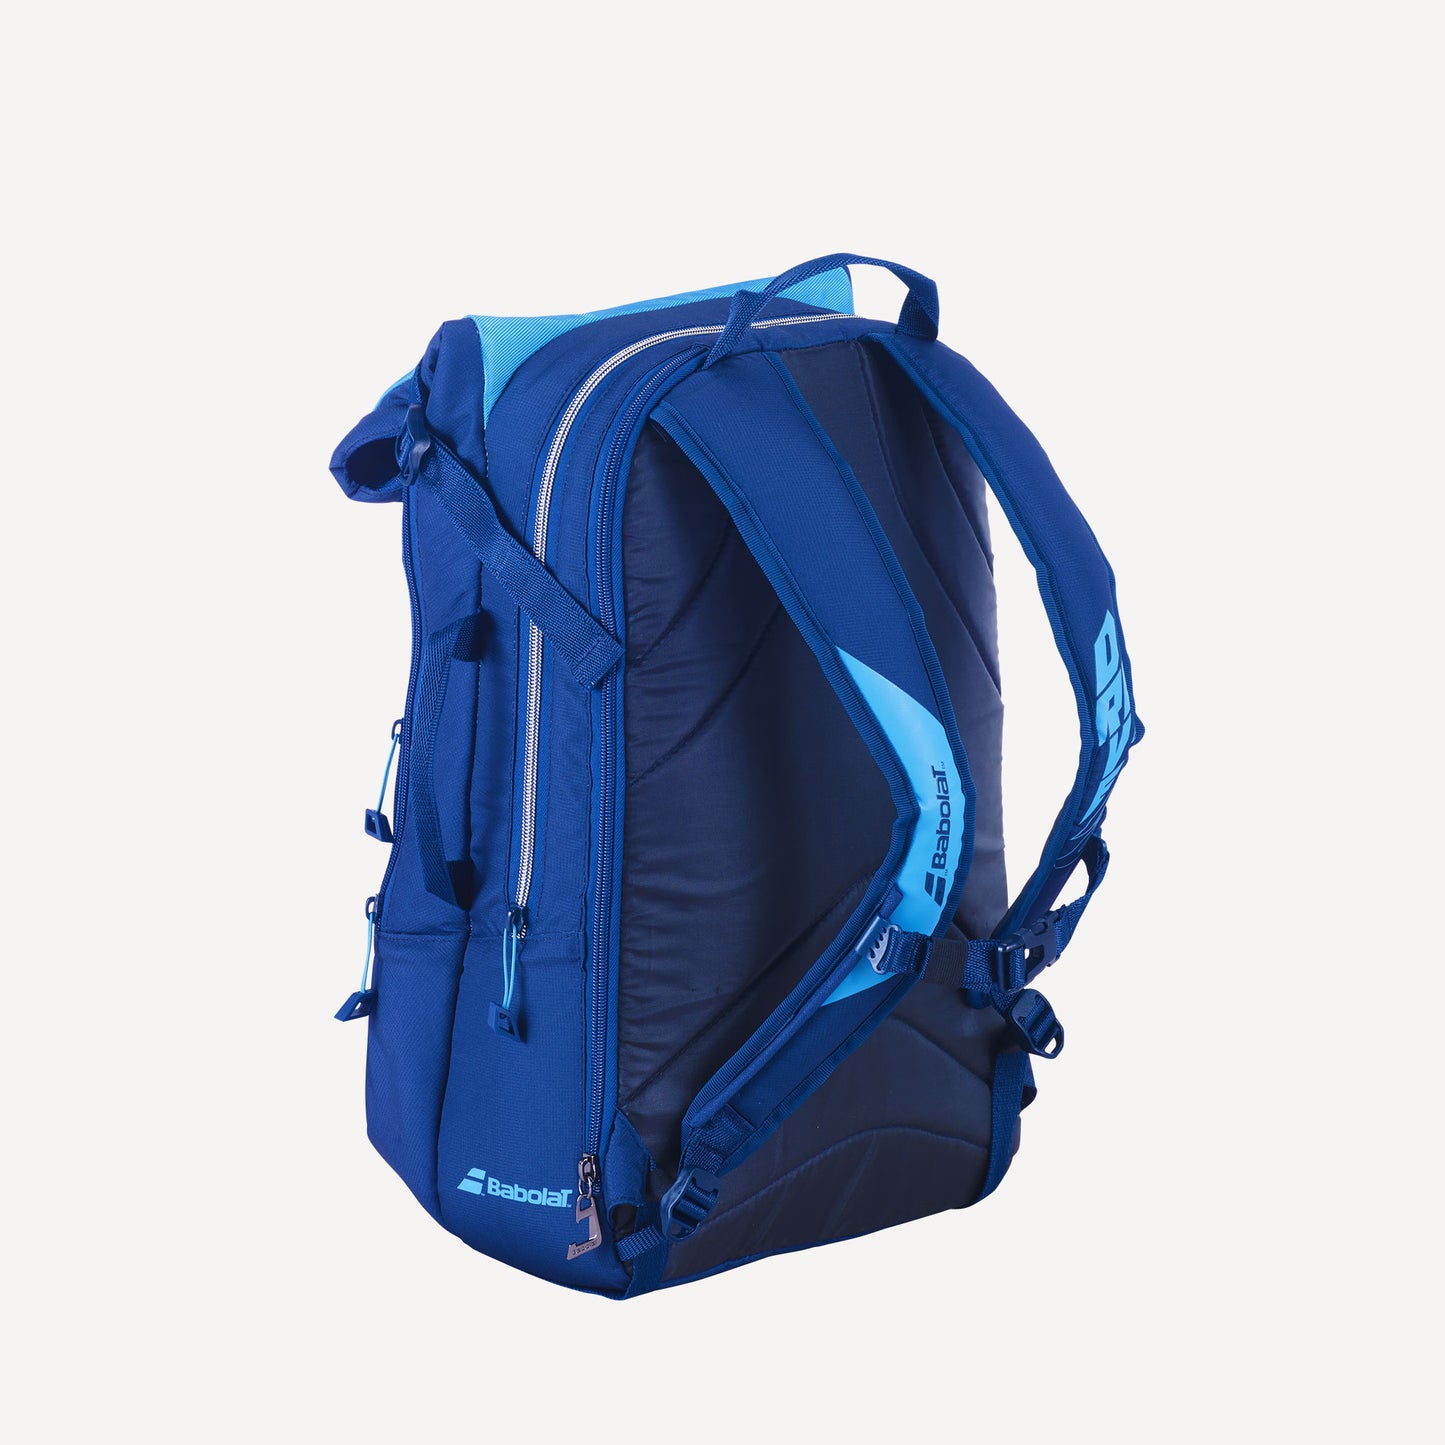 Babolat Pure Drive Tennis Backpack Blue (3)